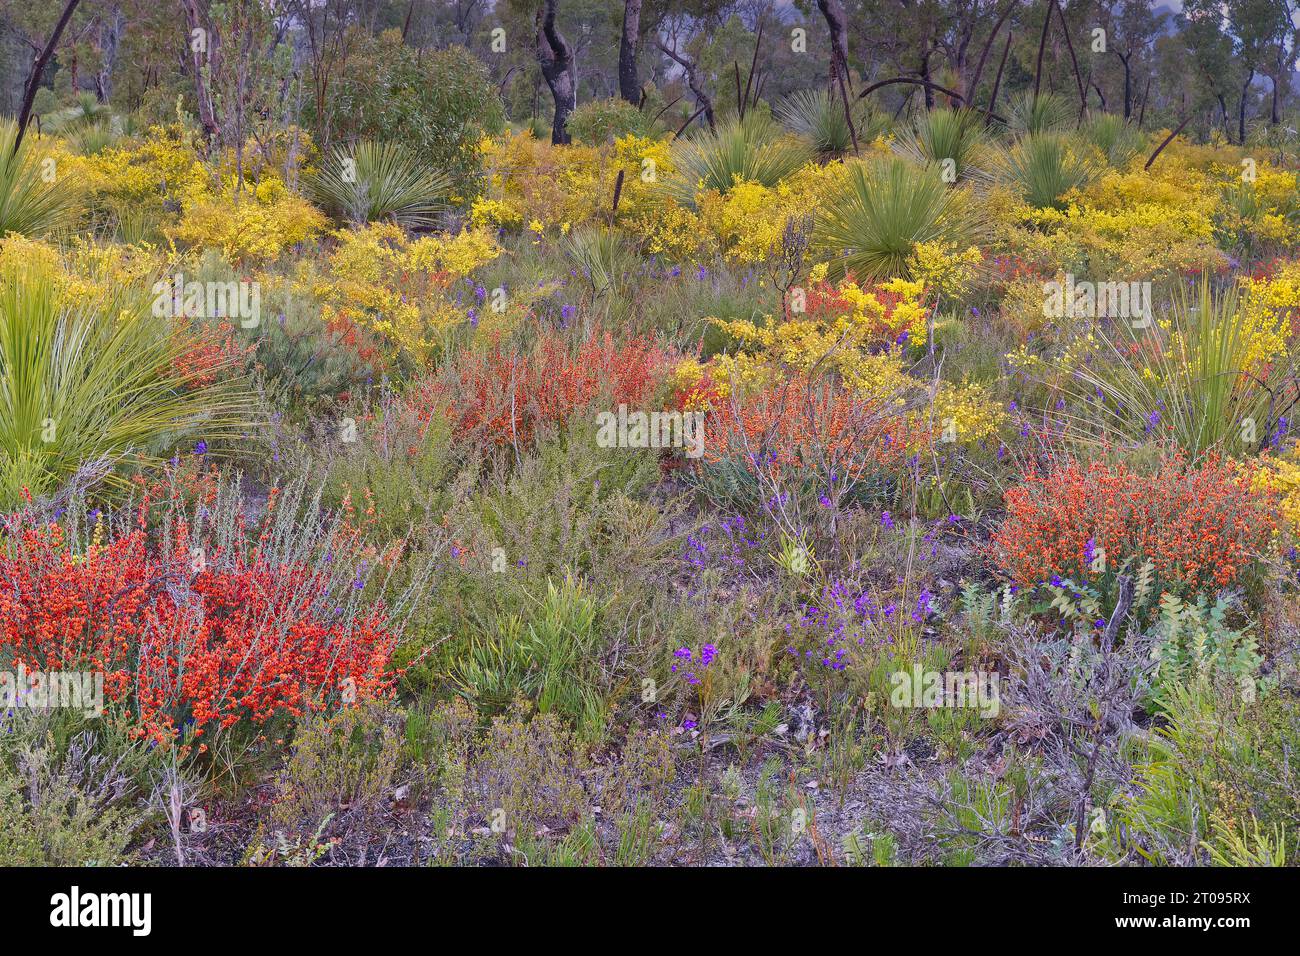 Wildflowers in Spring carpet a forest floor in Stirling Range National Park, Western Australia. Stock Photo